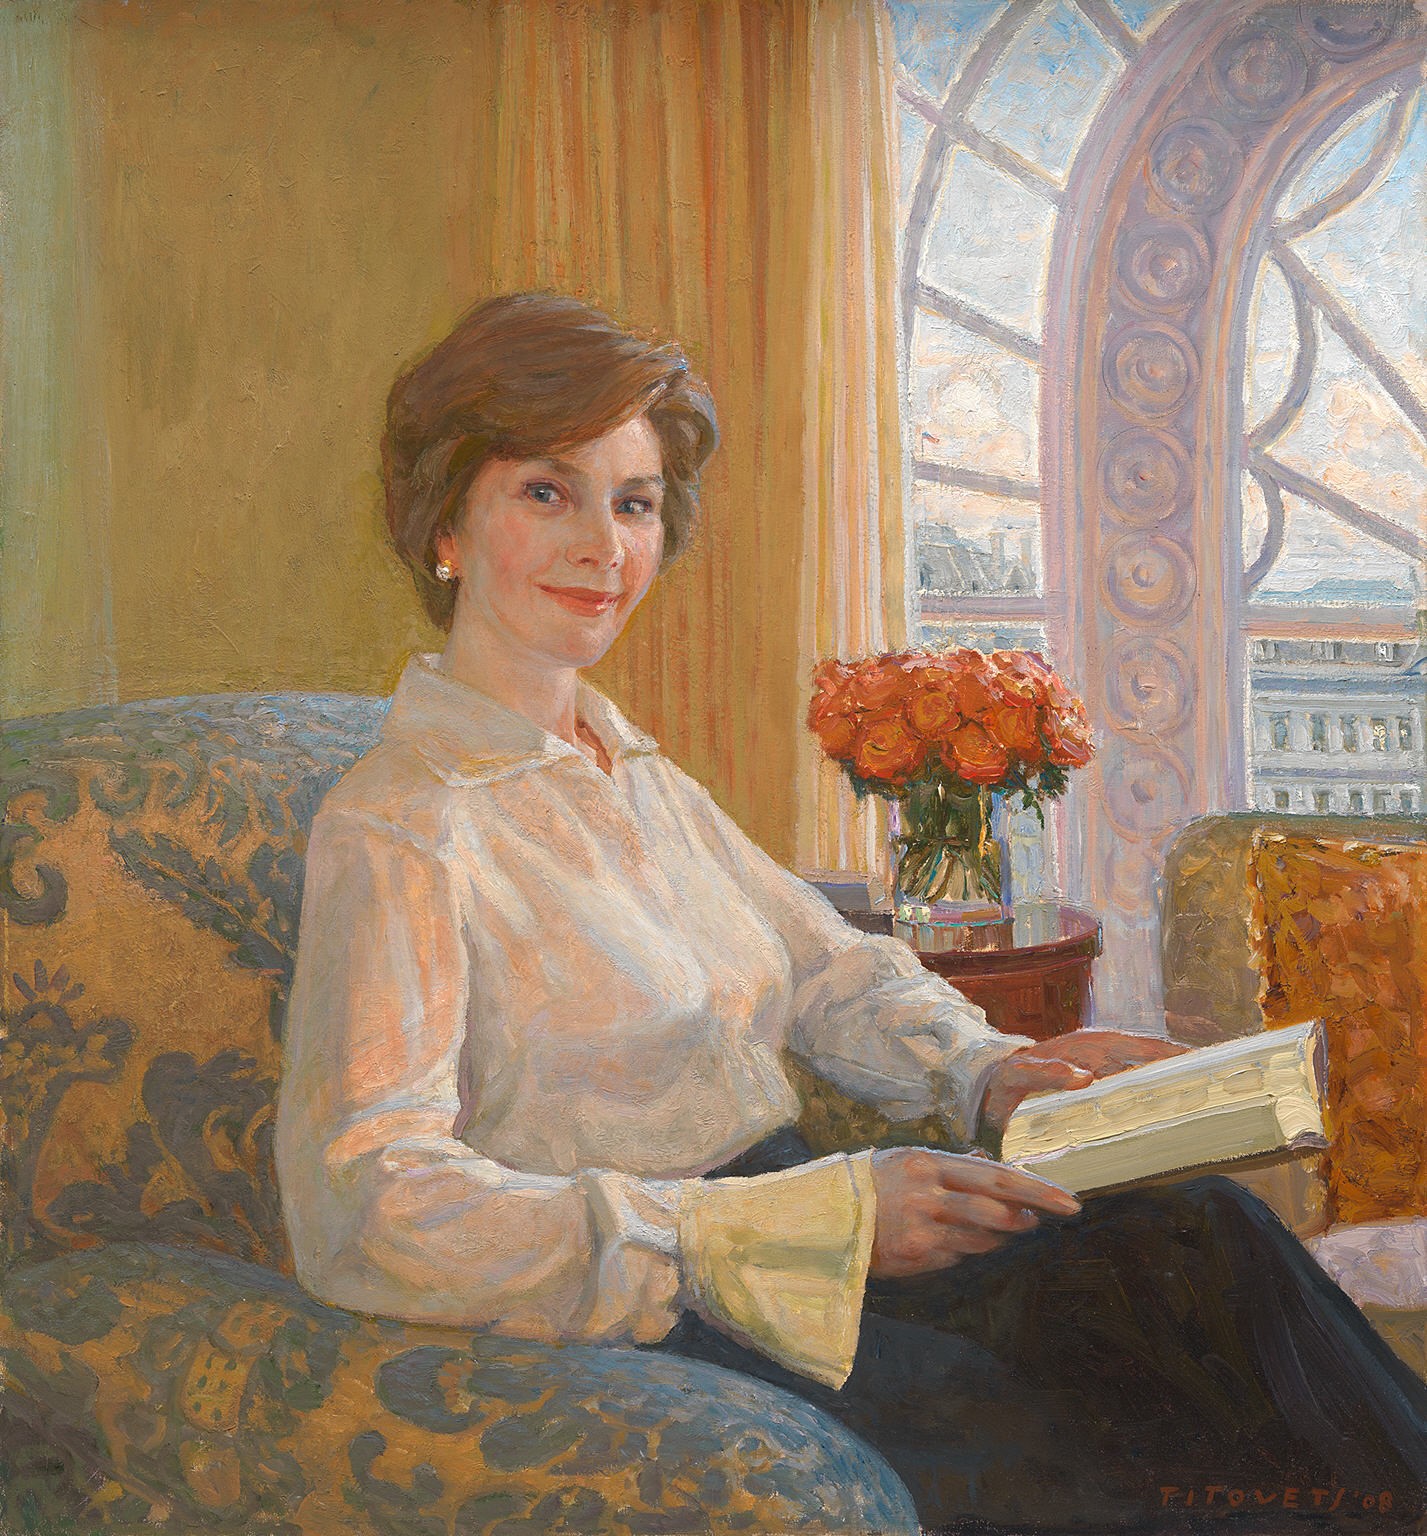 Painting of a woman in a white blouse sitting in a chair and looking up from a book